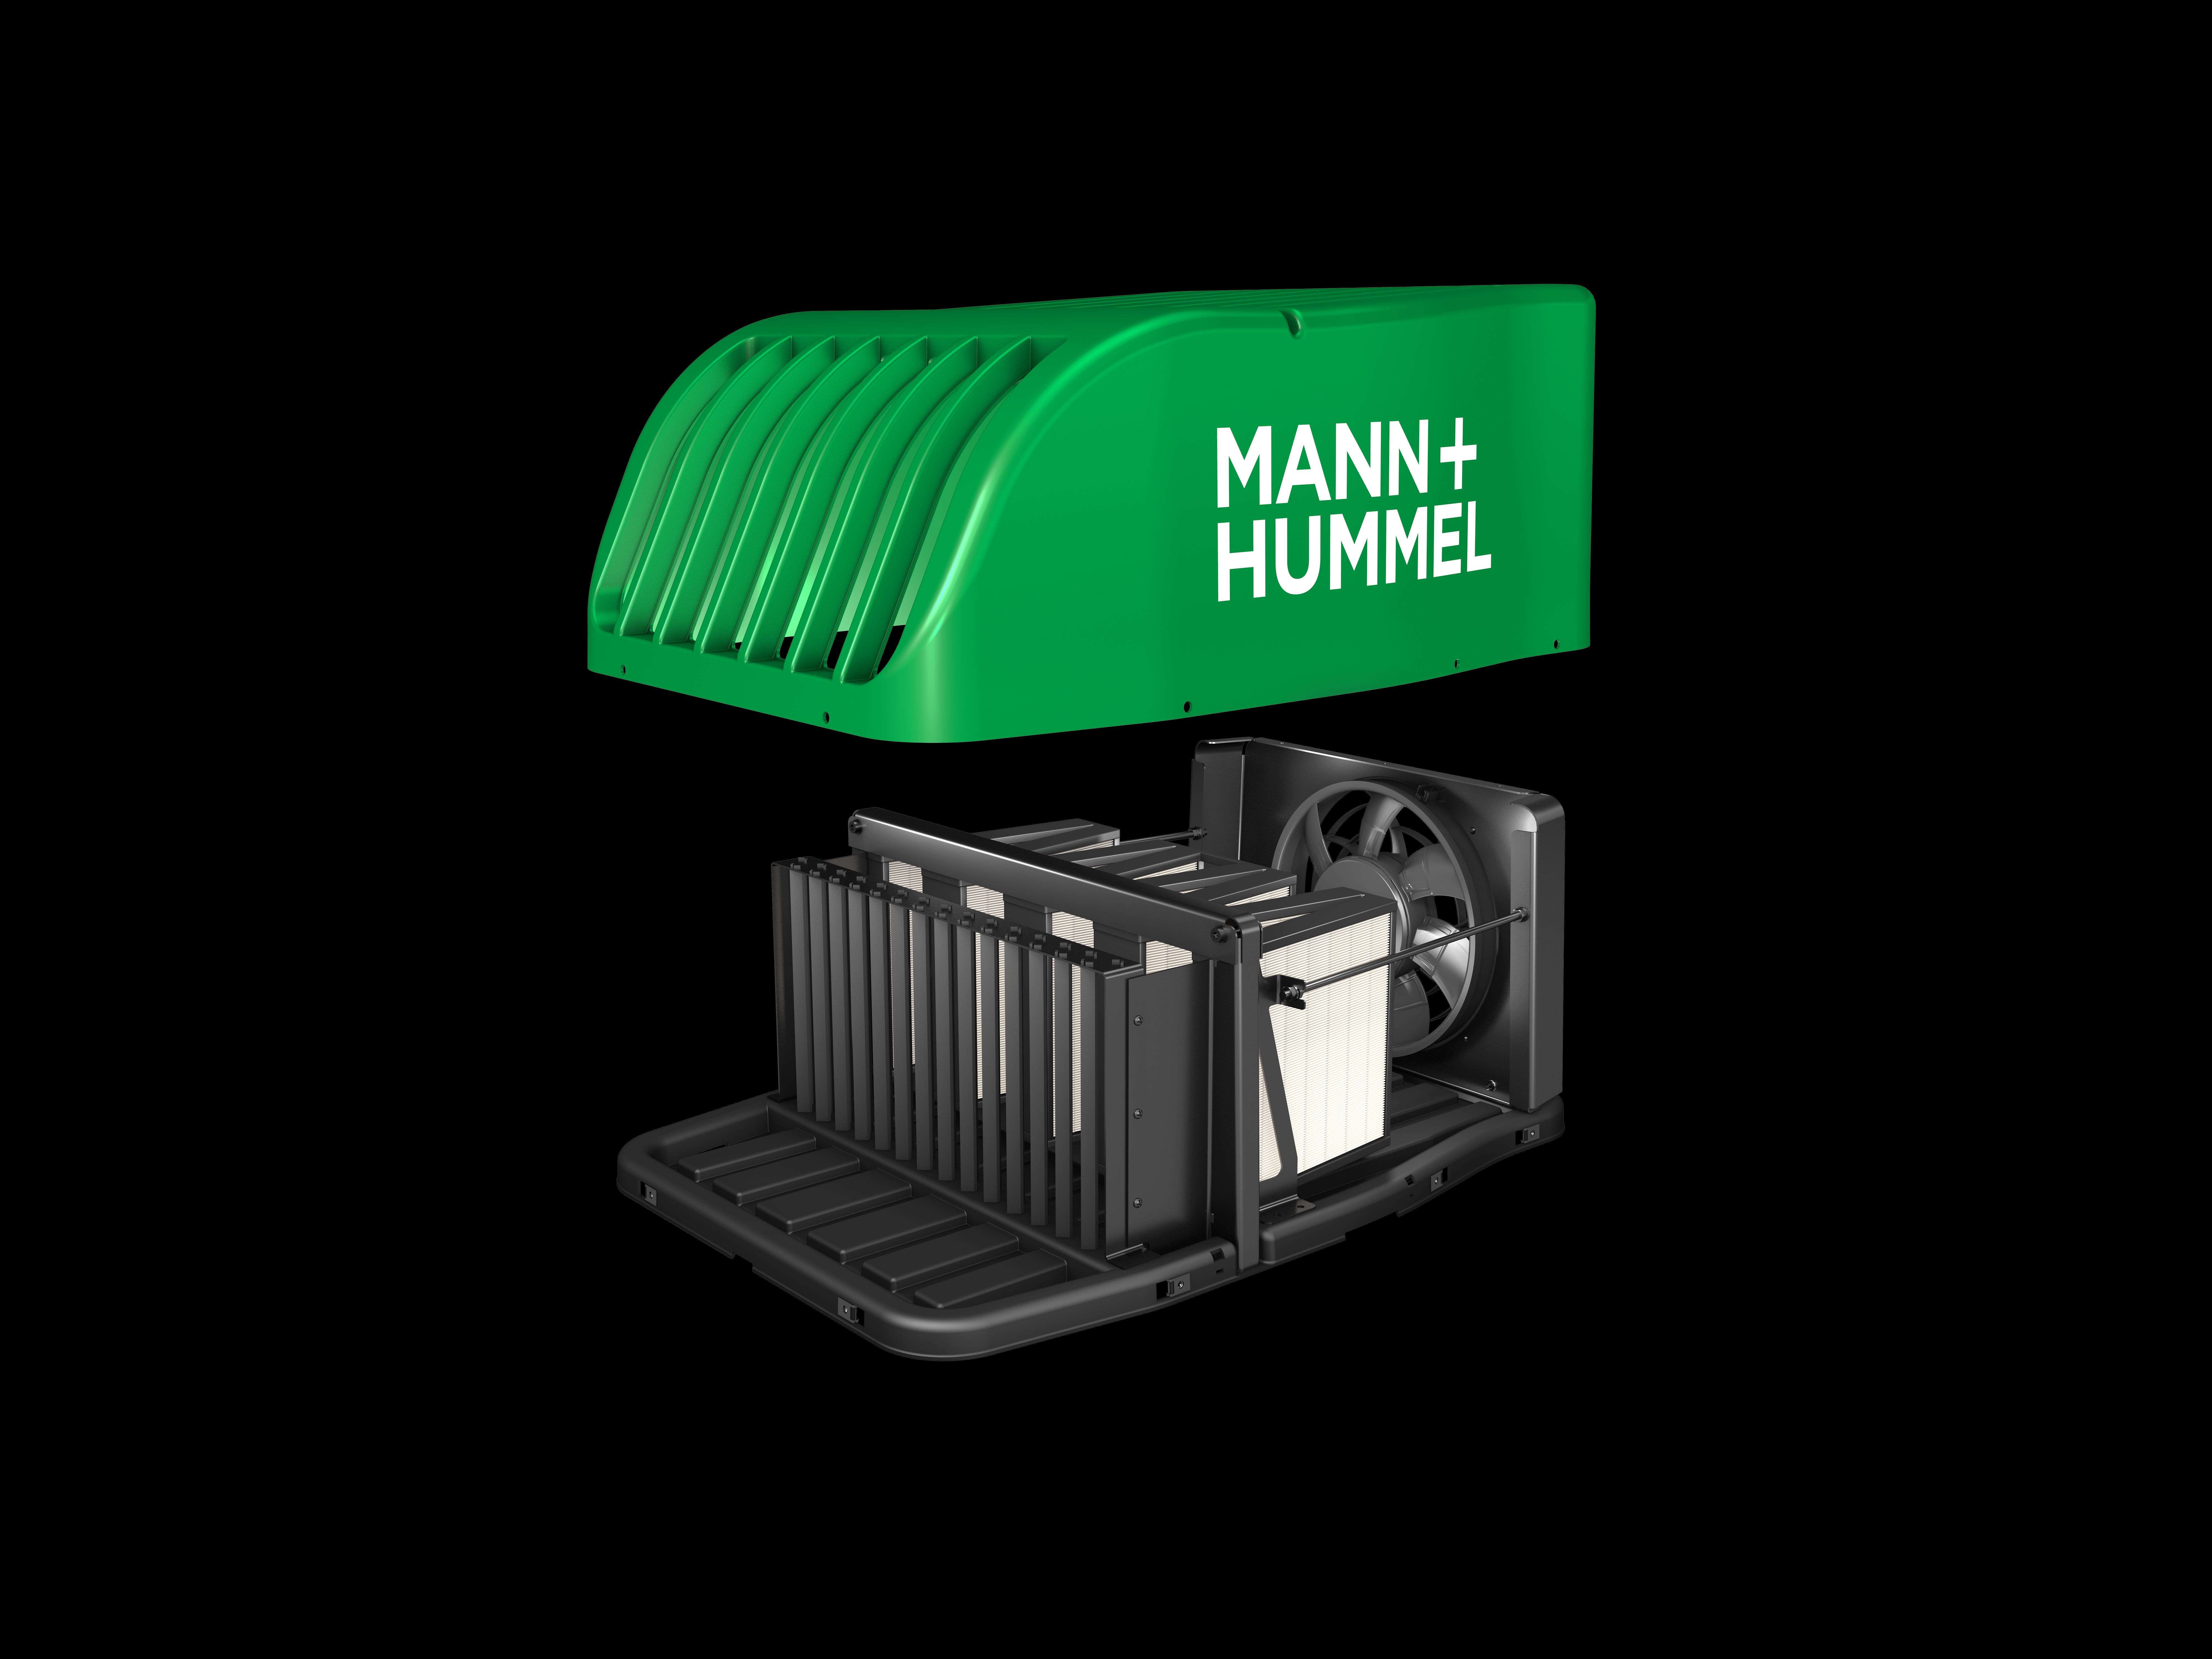 The PureAir fine dust particle filter roof box from Mann+Hummel.